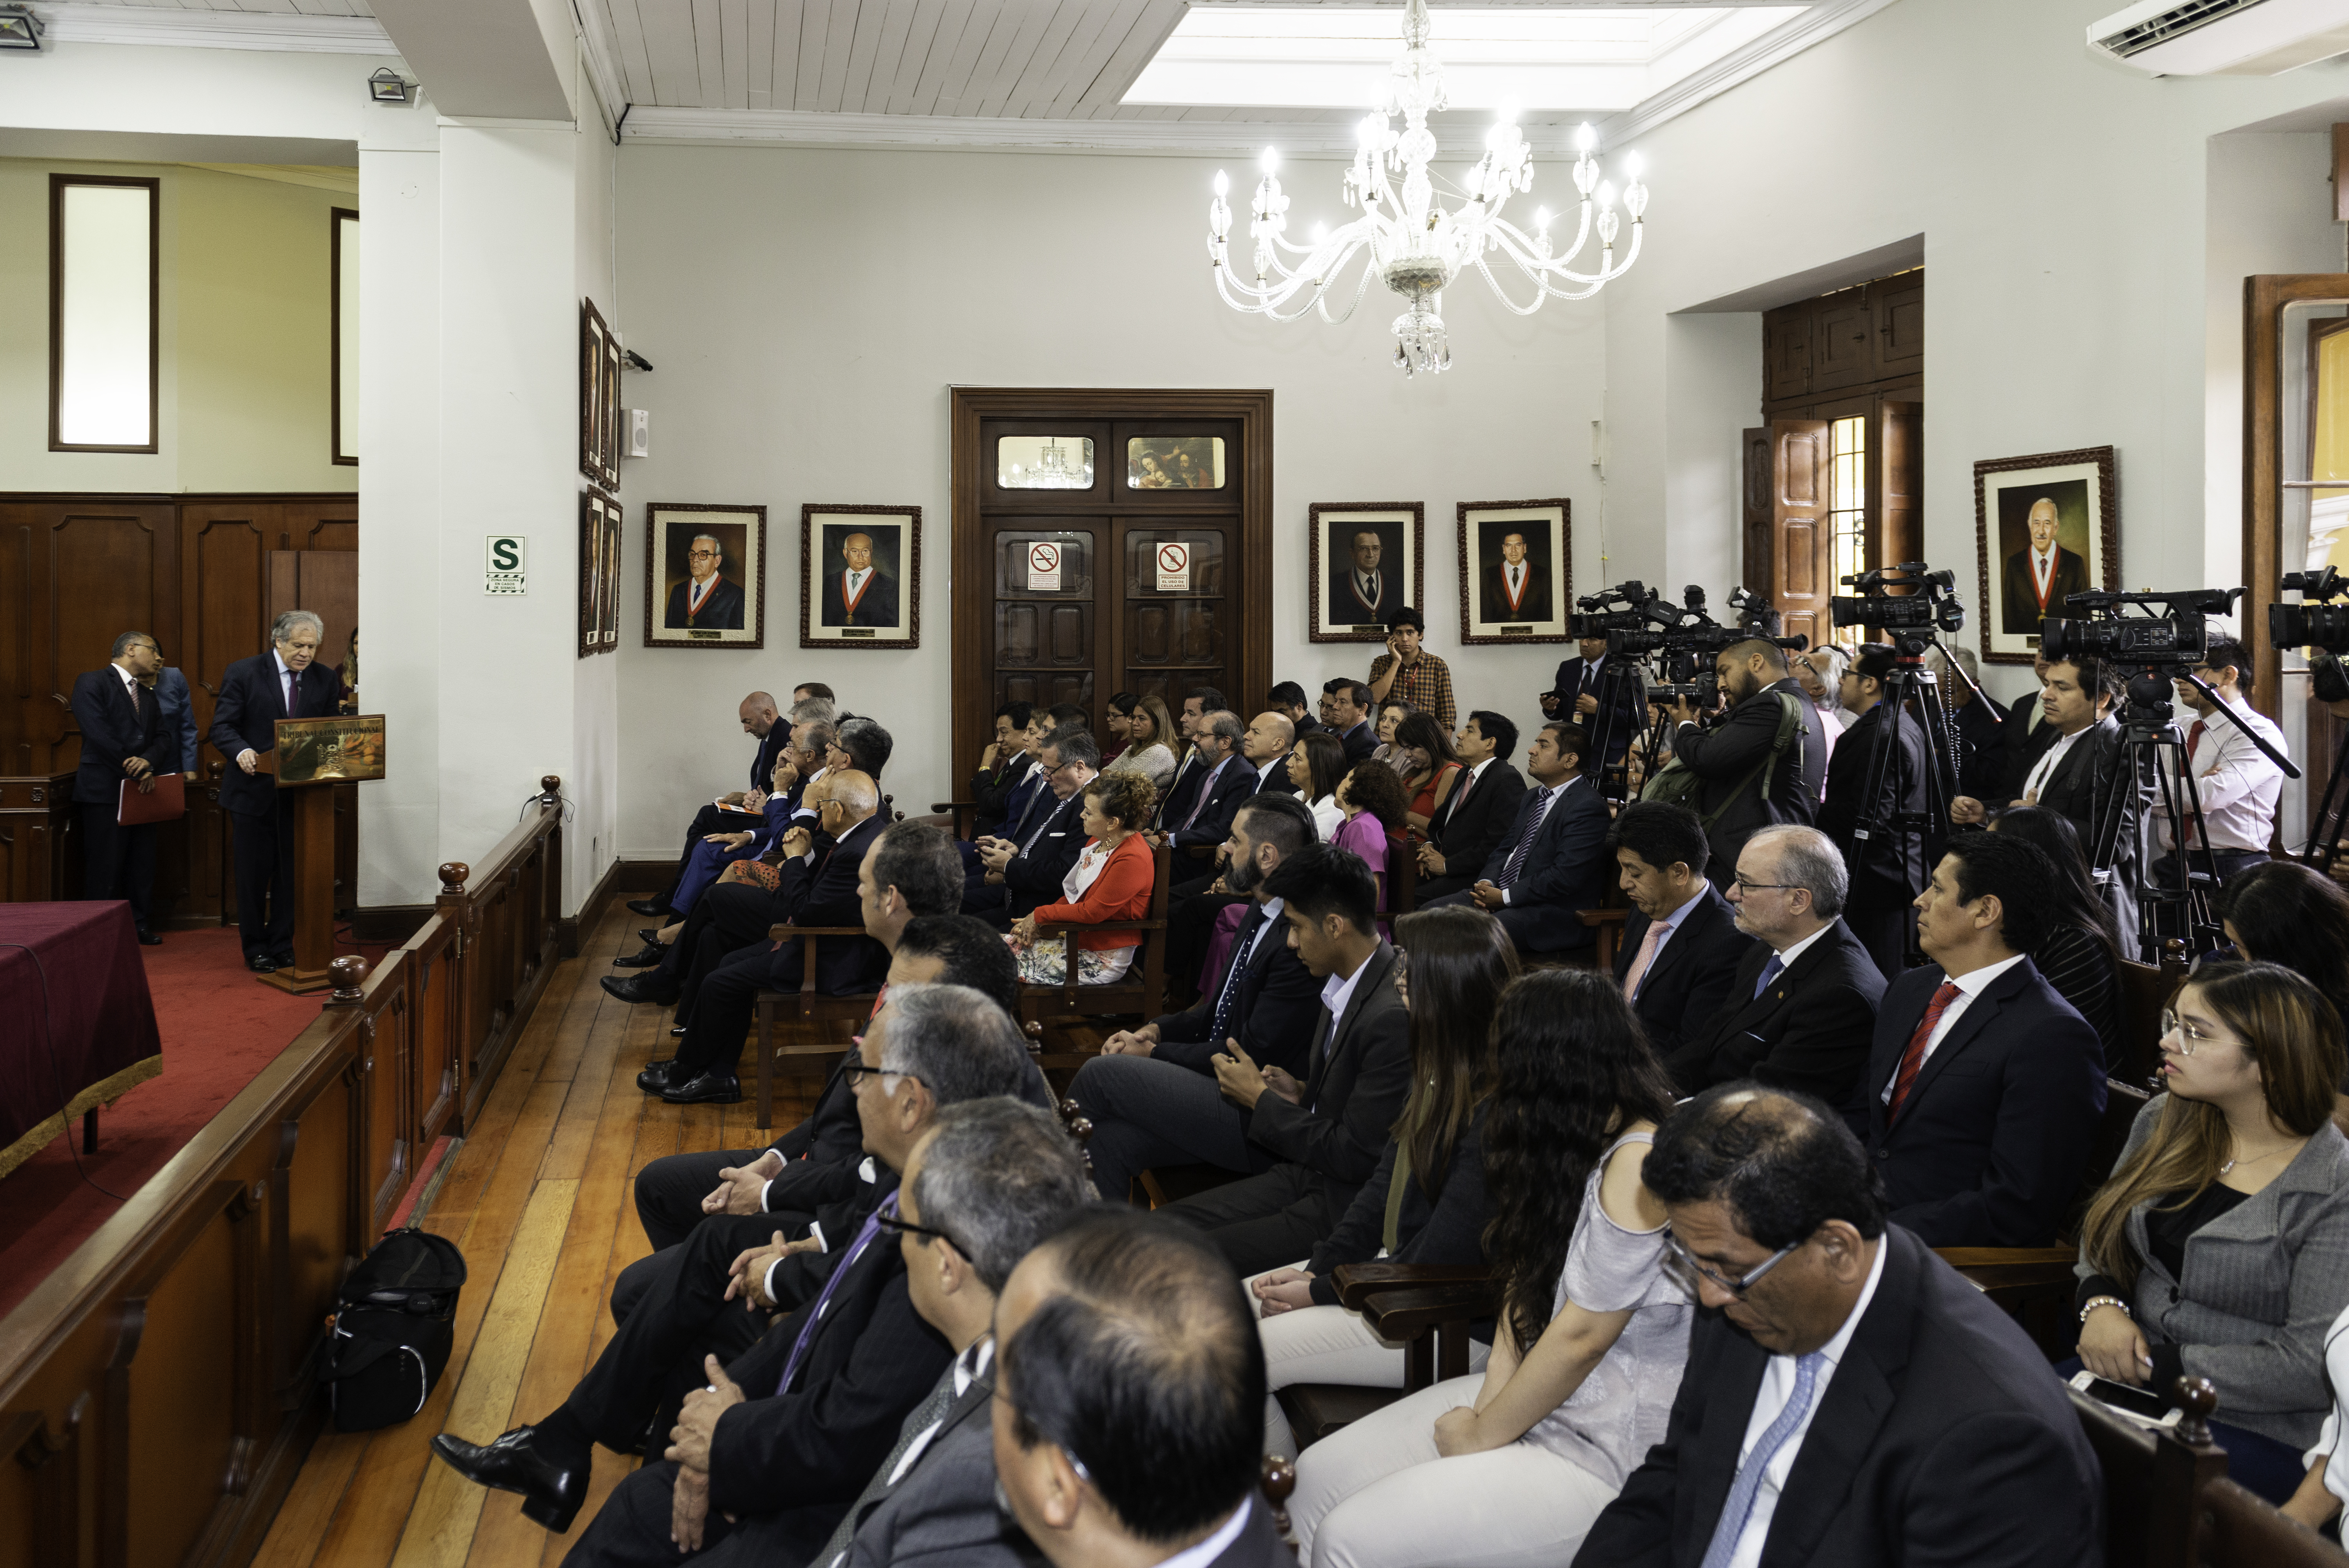 Constitutional Court of Peru (photo credit: OEA - OAS/flickr)